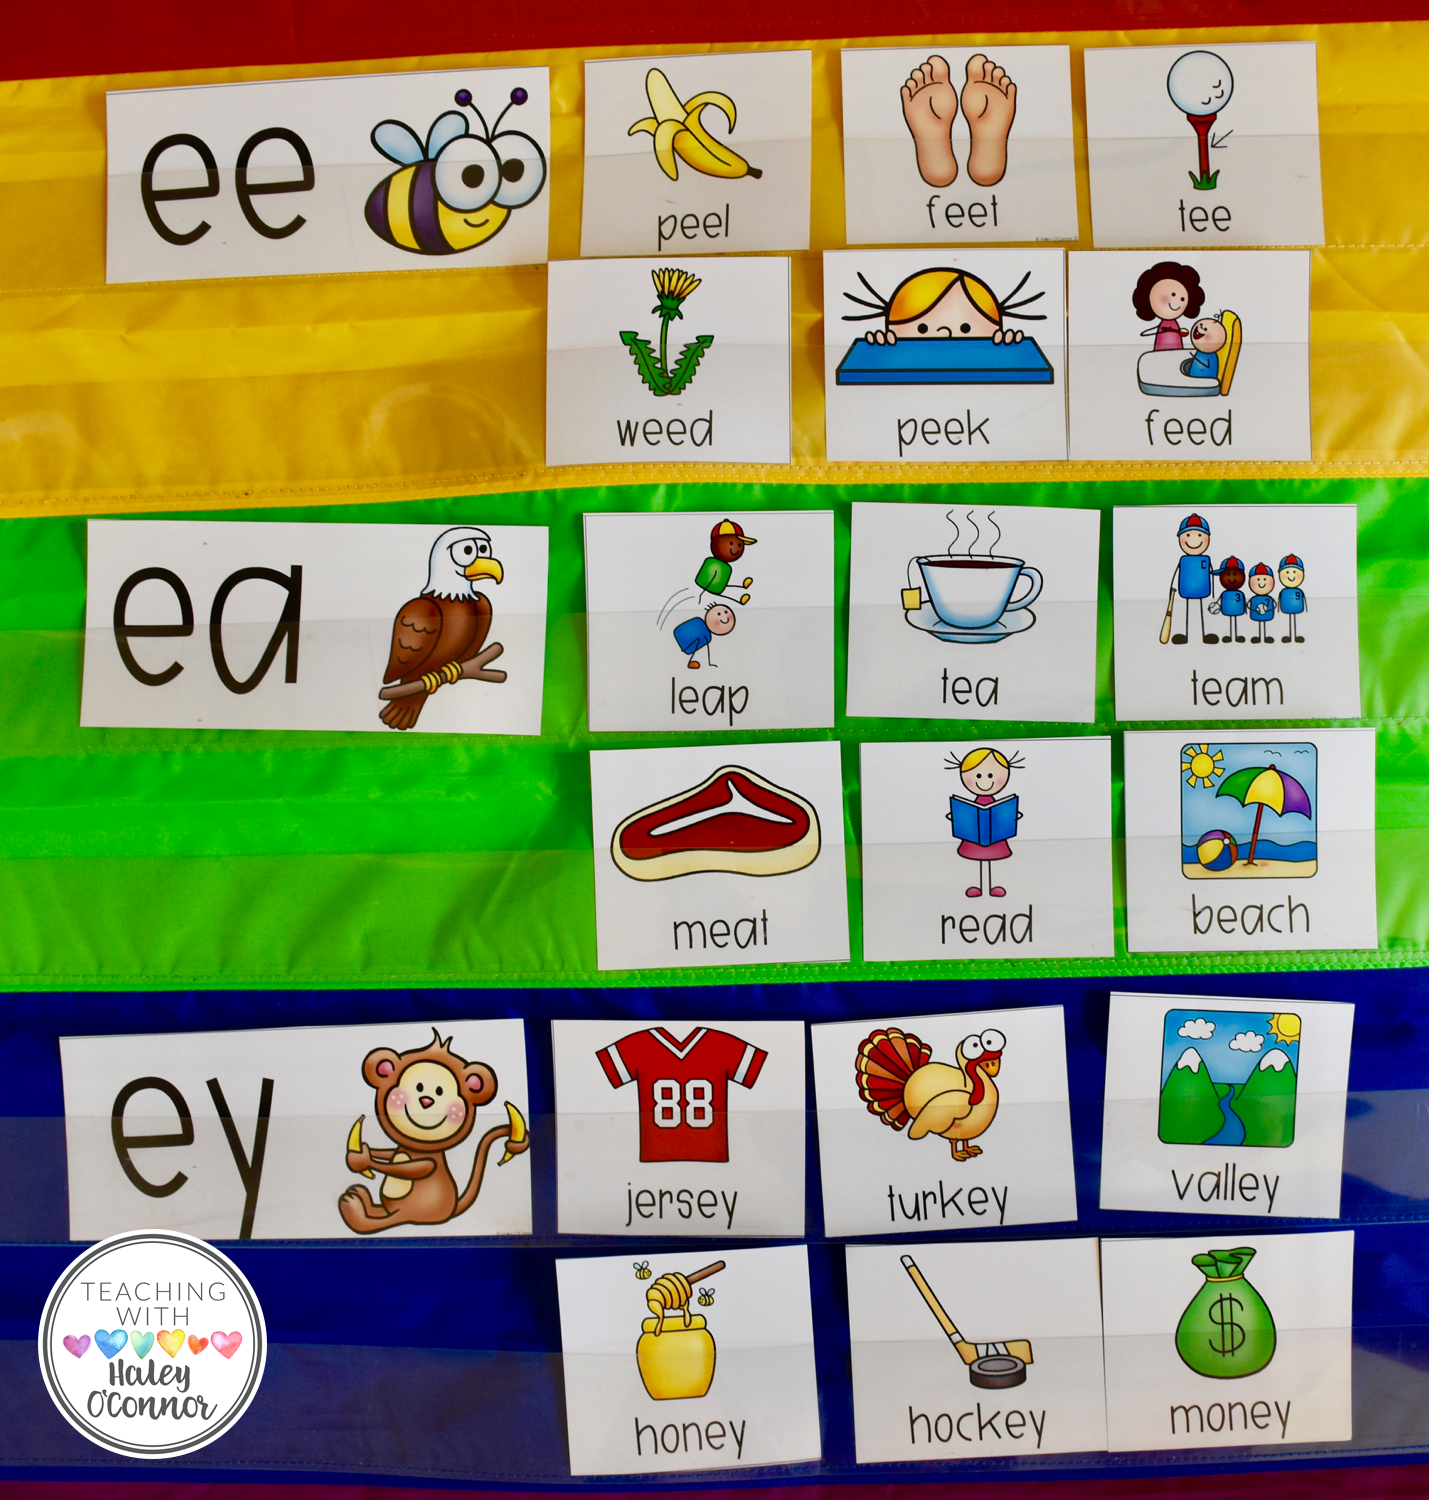 Sorts for teaching vowel teams. Word sort of EA, EE, and EY. Sounds of long E. 